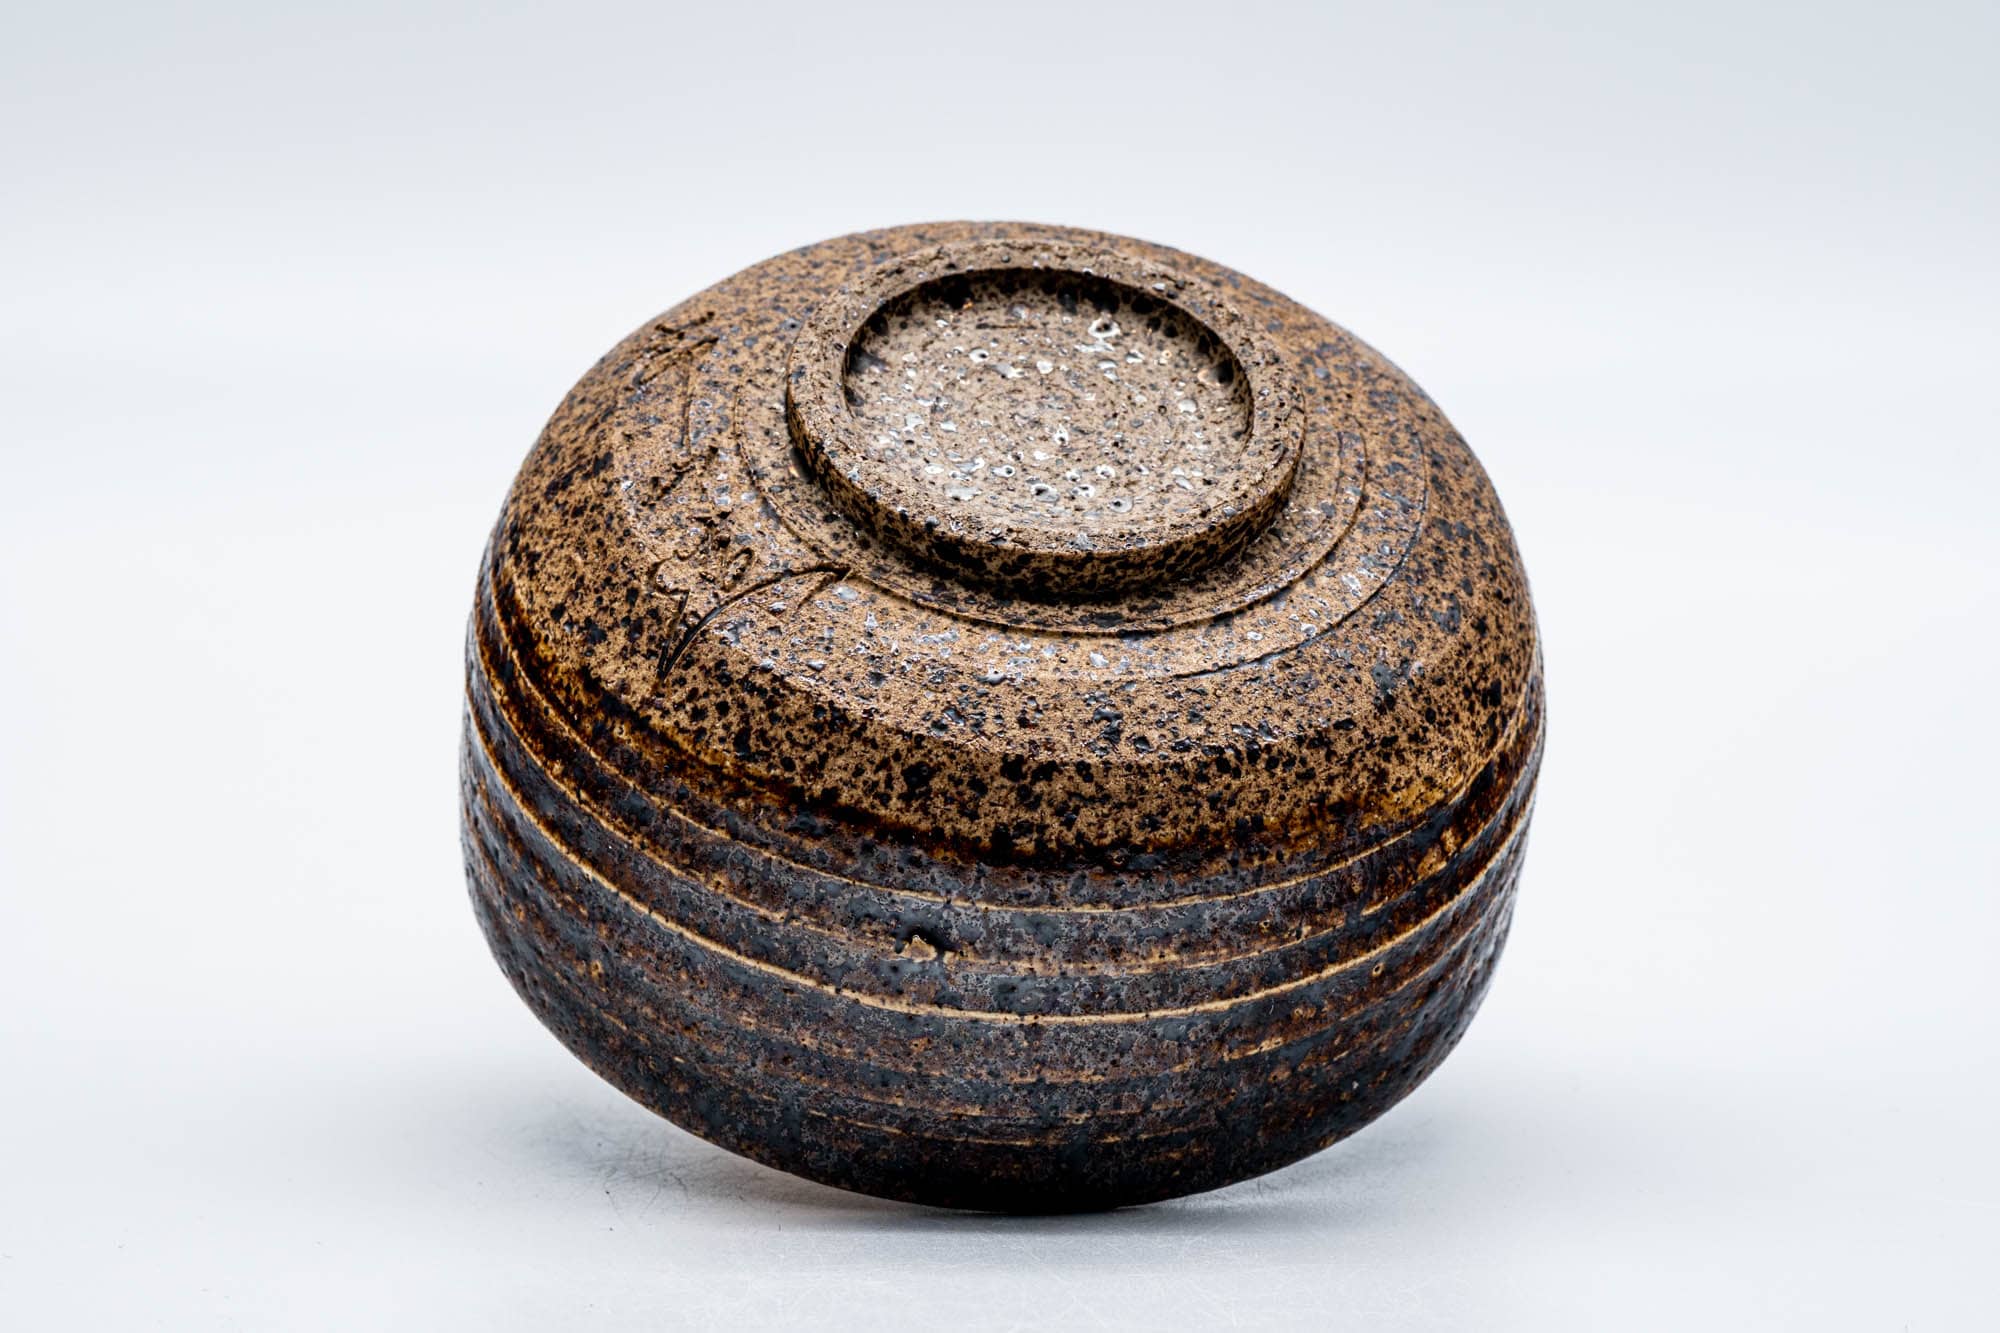 Japanese Matcha Bowl - Brown Speckled Spiraling Earthy Chawan - 300ml